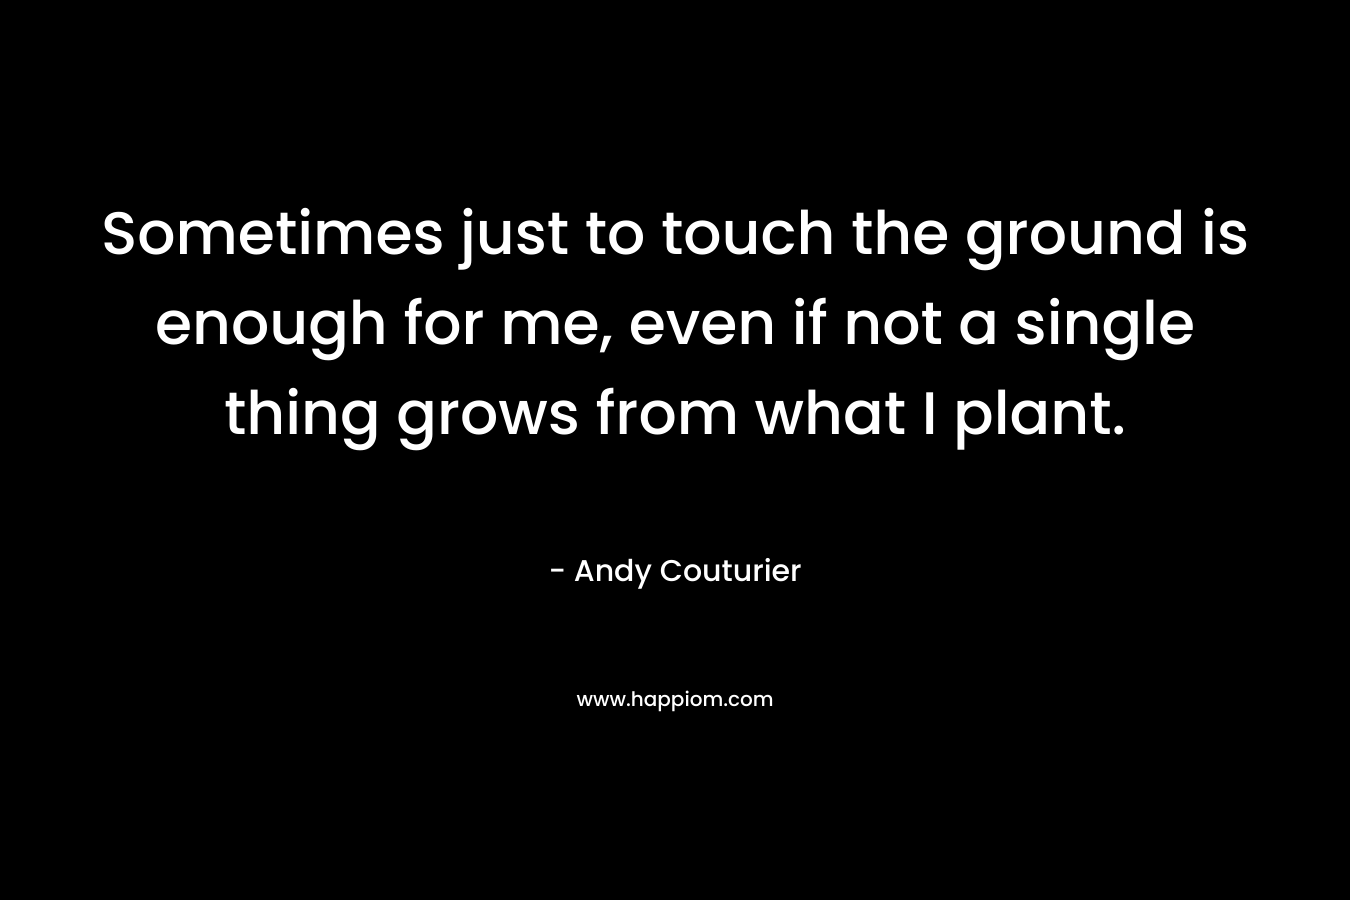 Sometimes just to touch the ground is enough for me, even if not a single thing grows from what I plant. – Andy Couturier